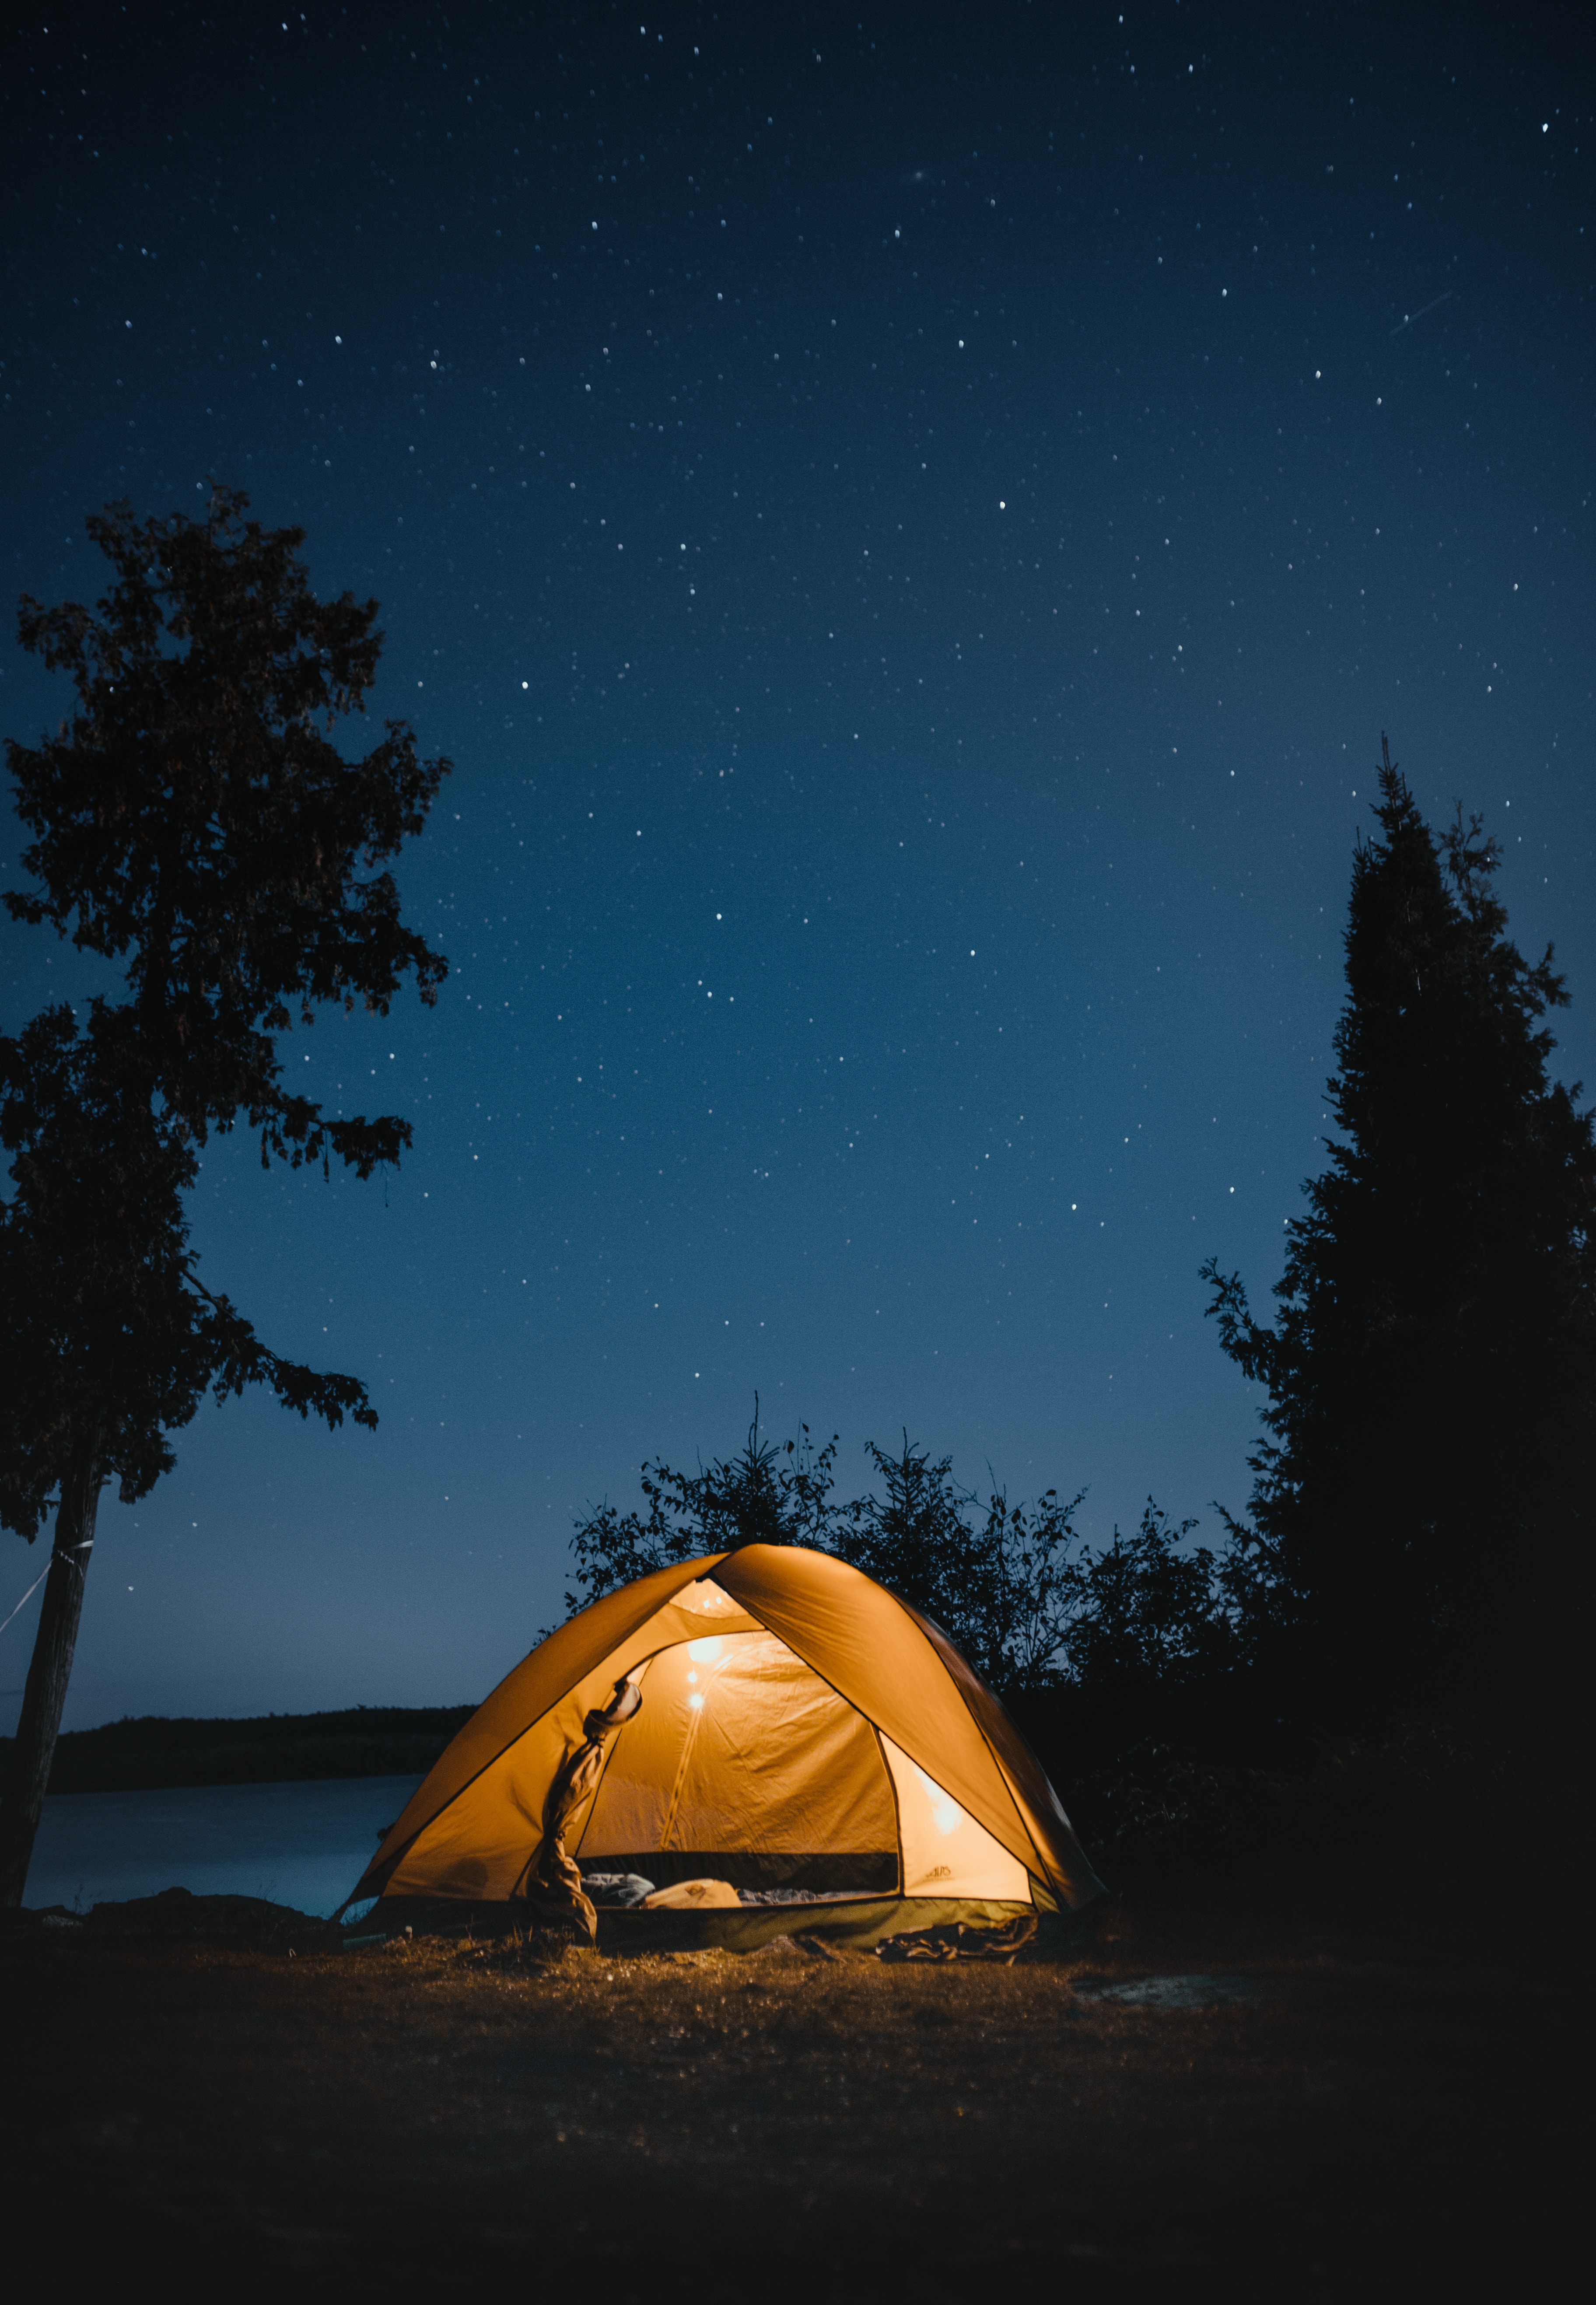 nature, tent, camping, campsite, starry sky, night, journey